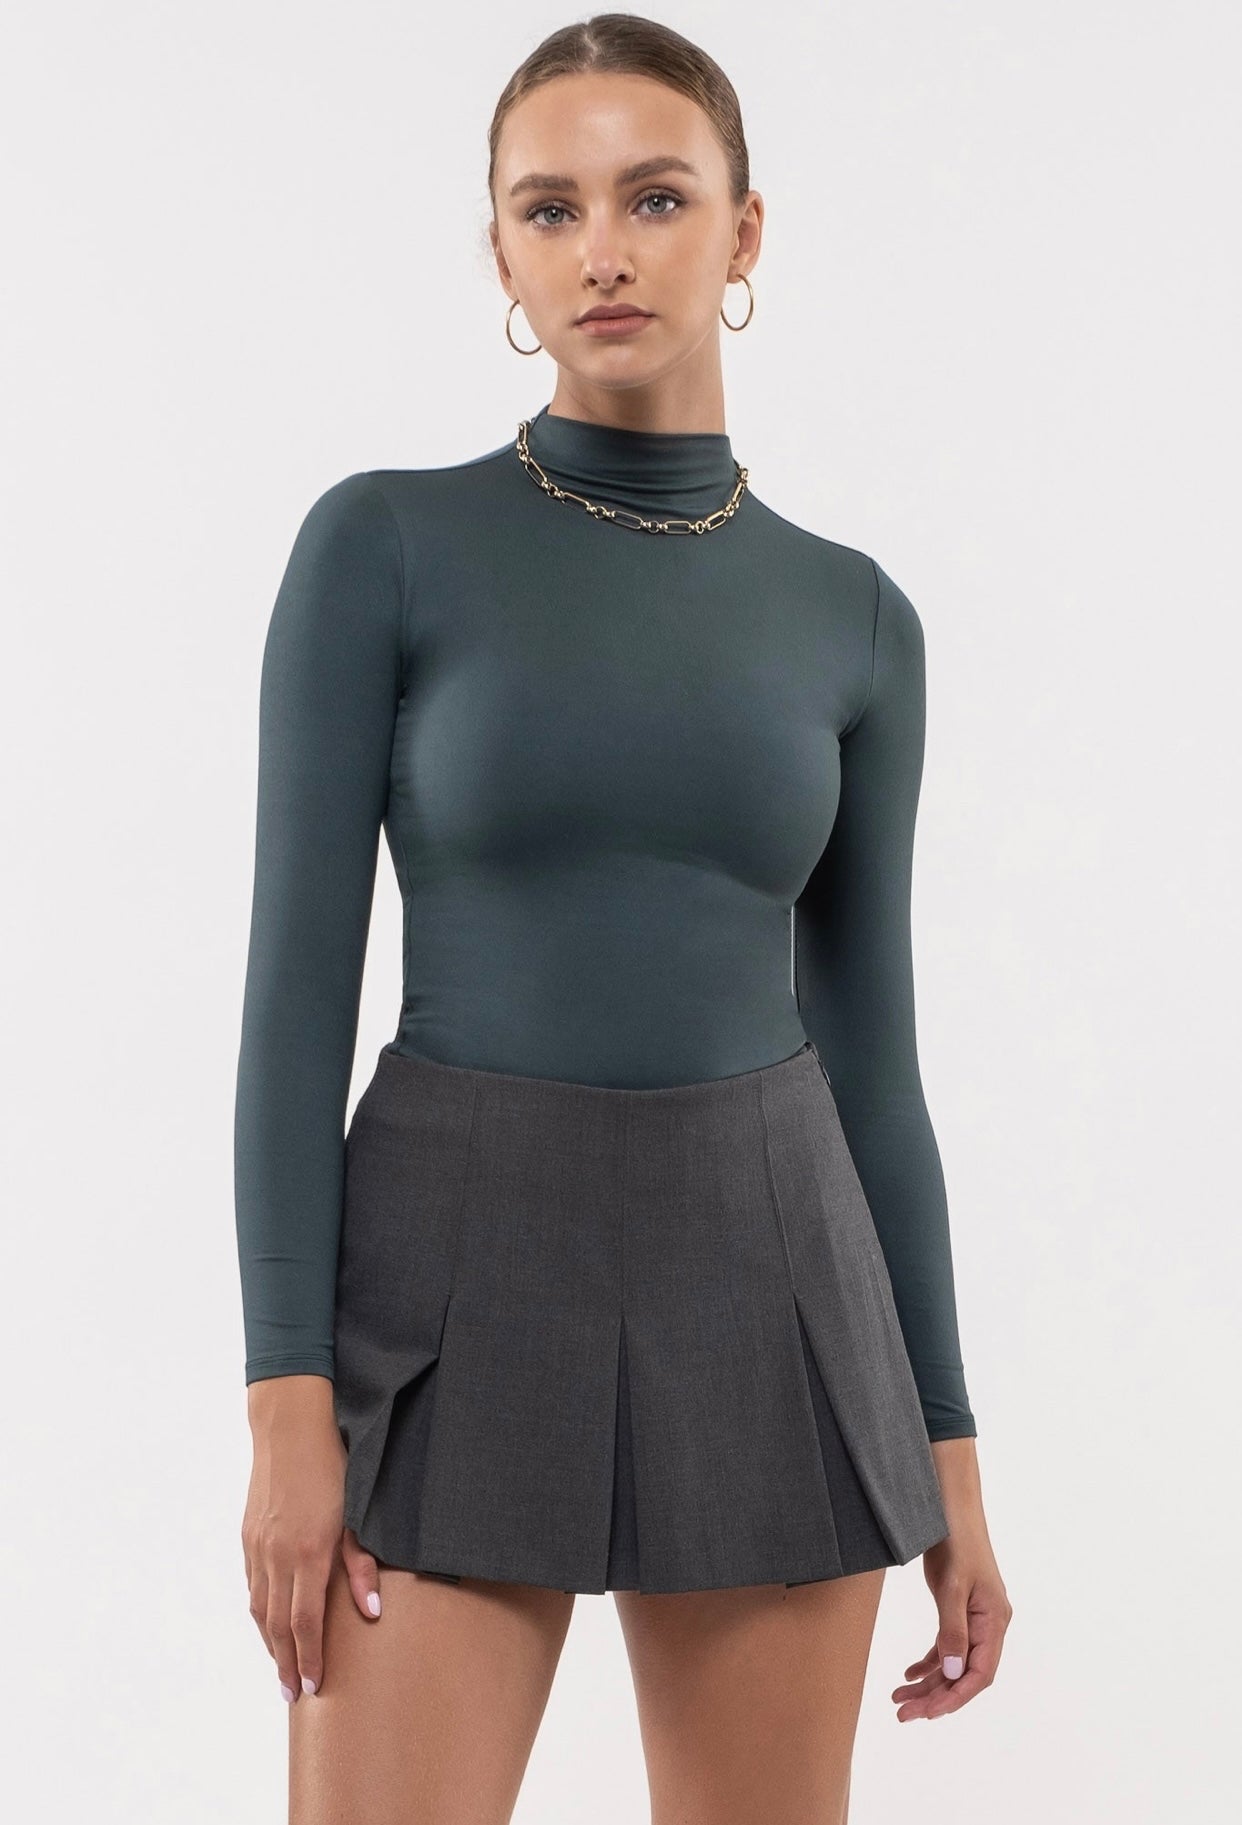 Our Purpose Teal Mock Neck Seamless Long Sleeve Top